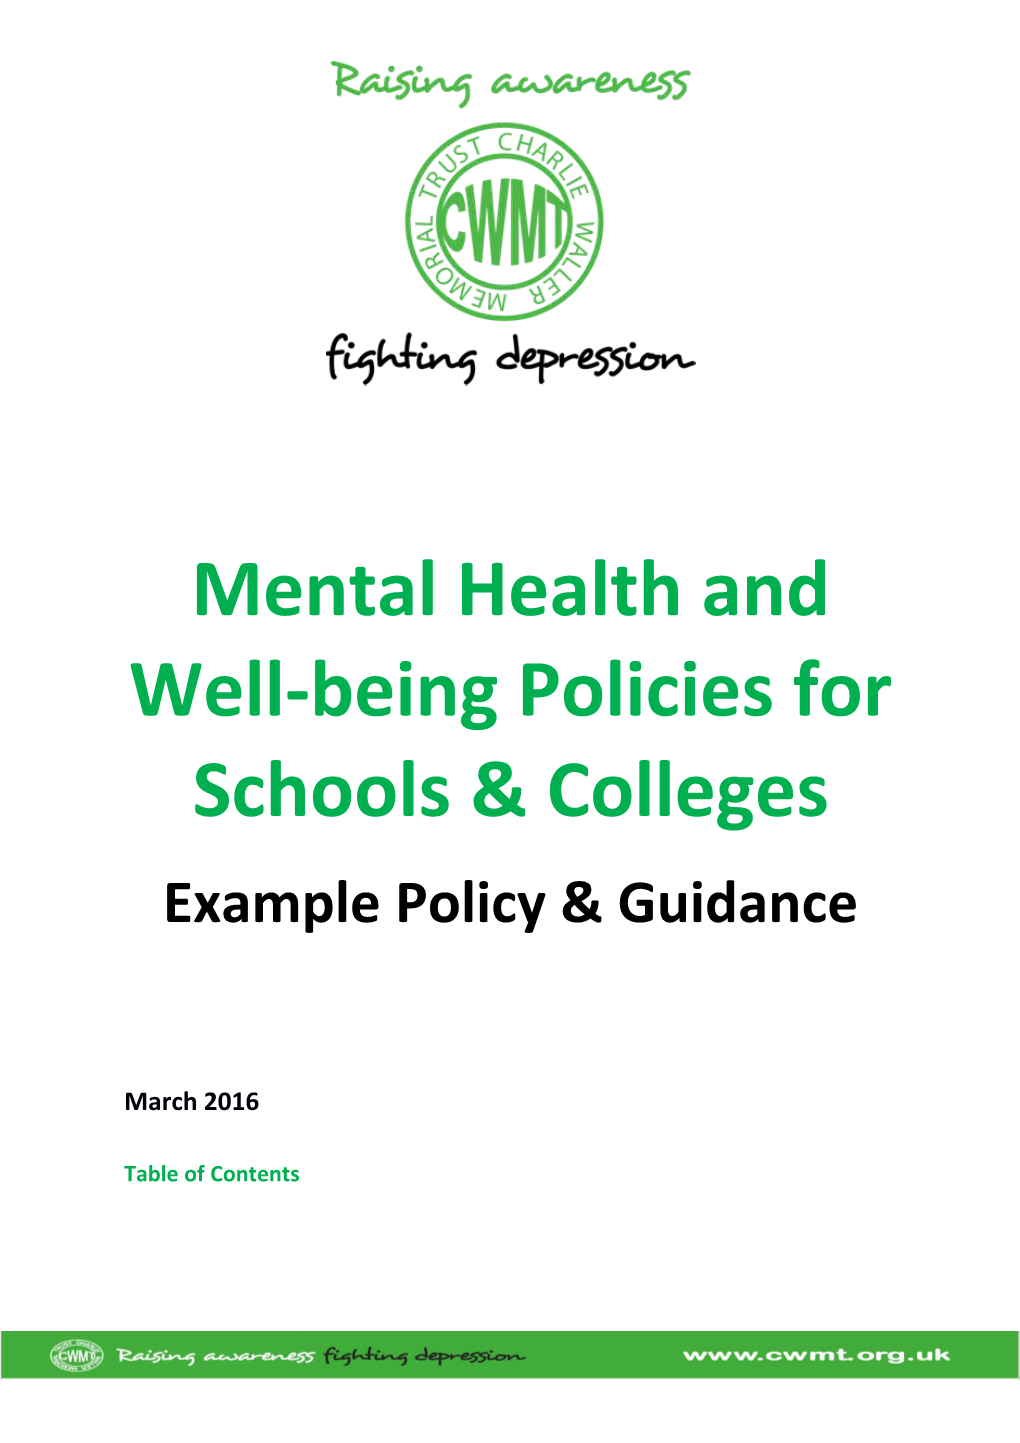 Mental Health and Well-Being Policies for Schools& Colleges